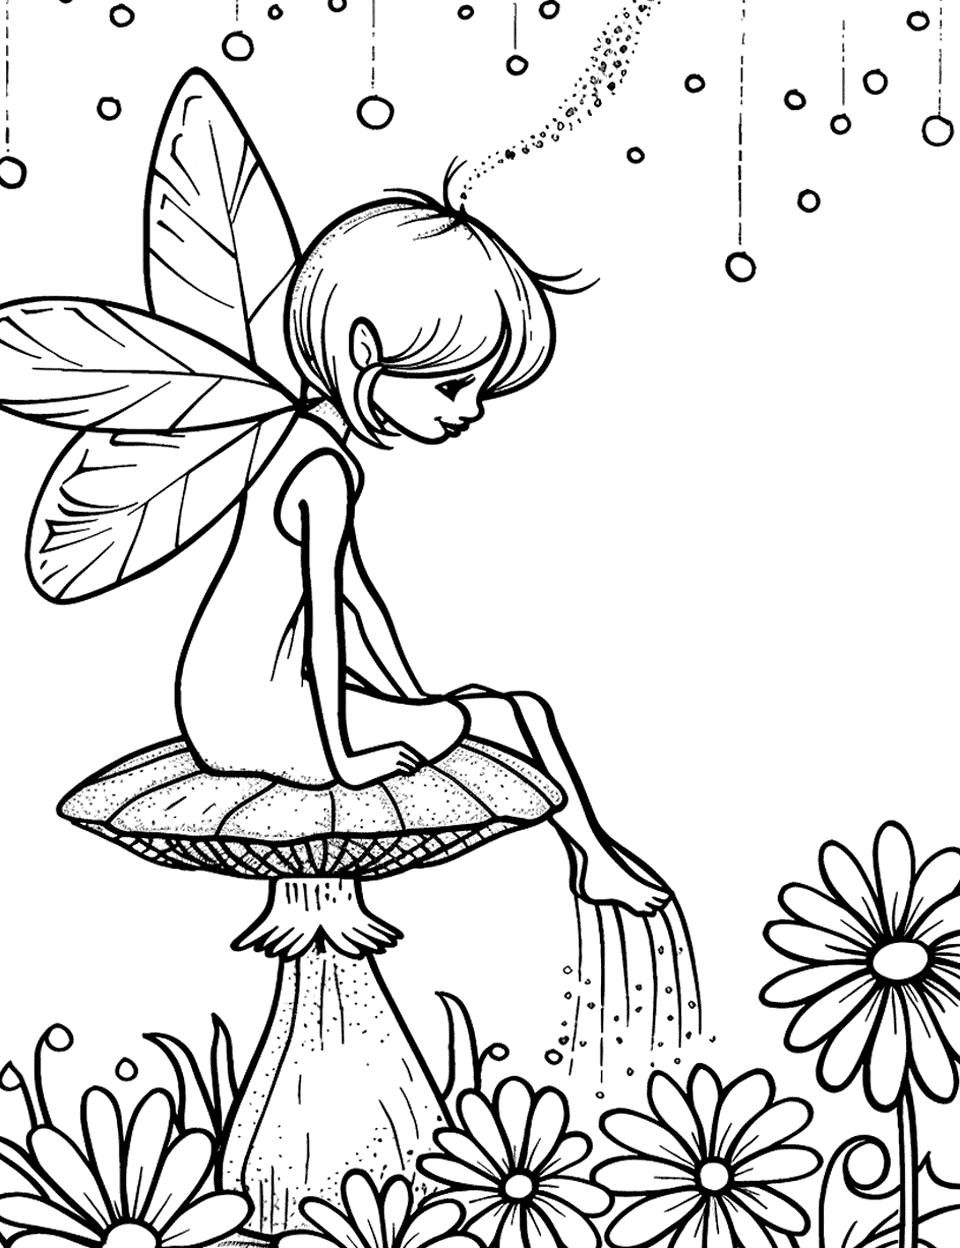 Fairy Sitting on a Mushroom Garden Coloring Page - A small fairy perched on a mushroom in a fairy garden, surrounded by twinkling lights.